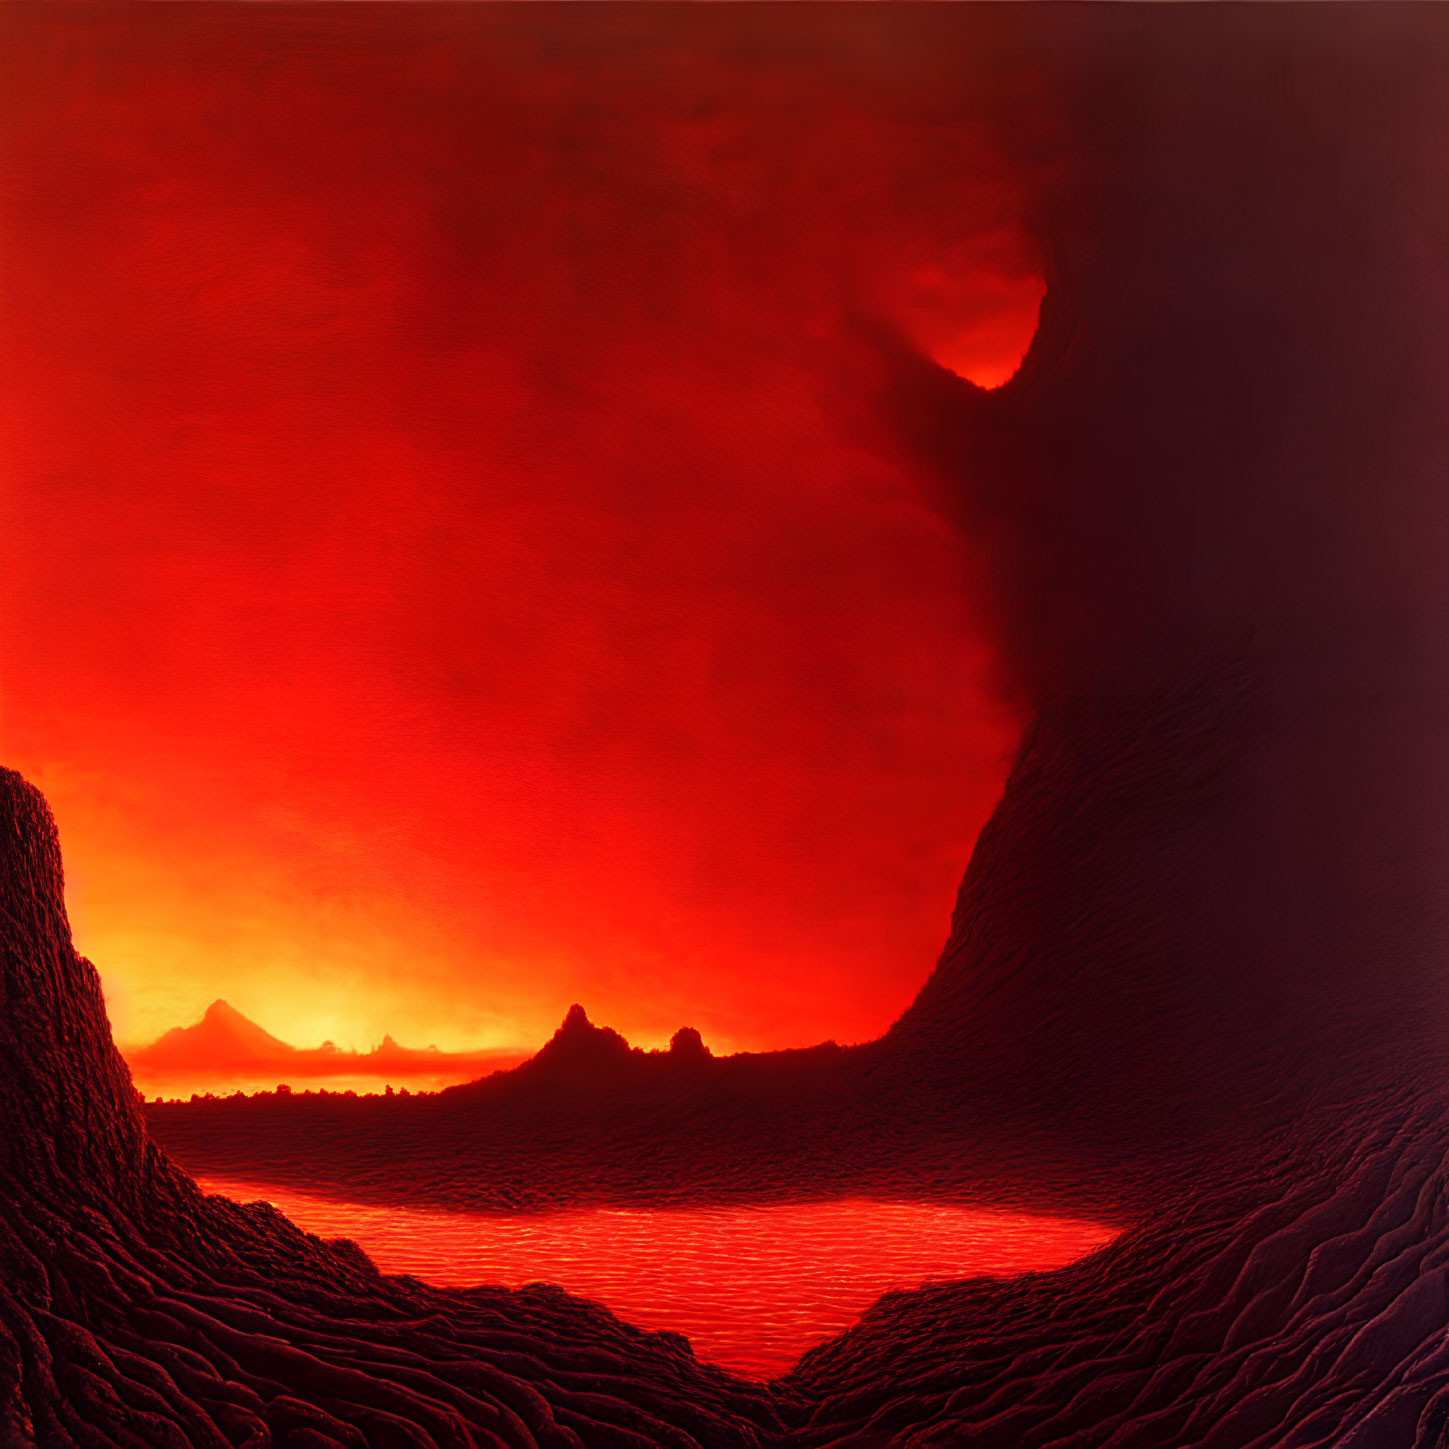 Fiery volcanic landscape with molten lava flows and red sky